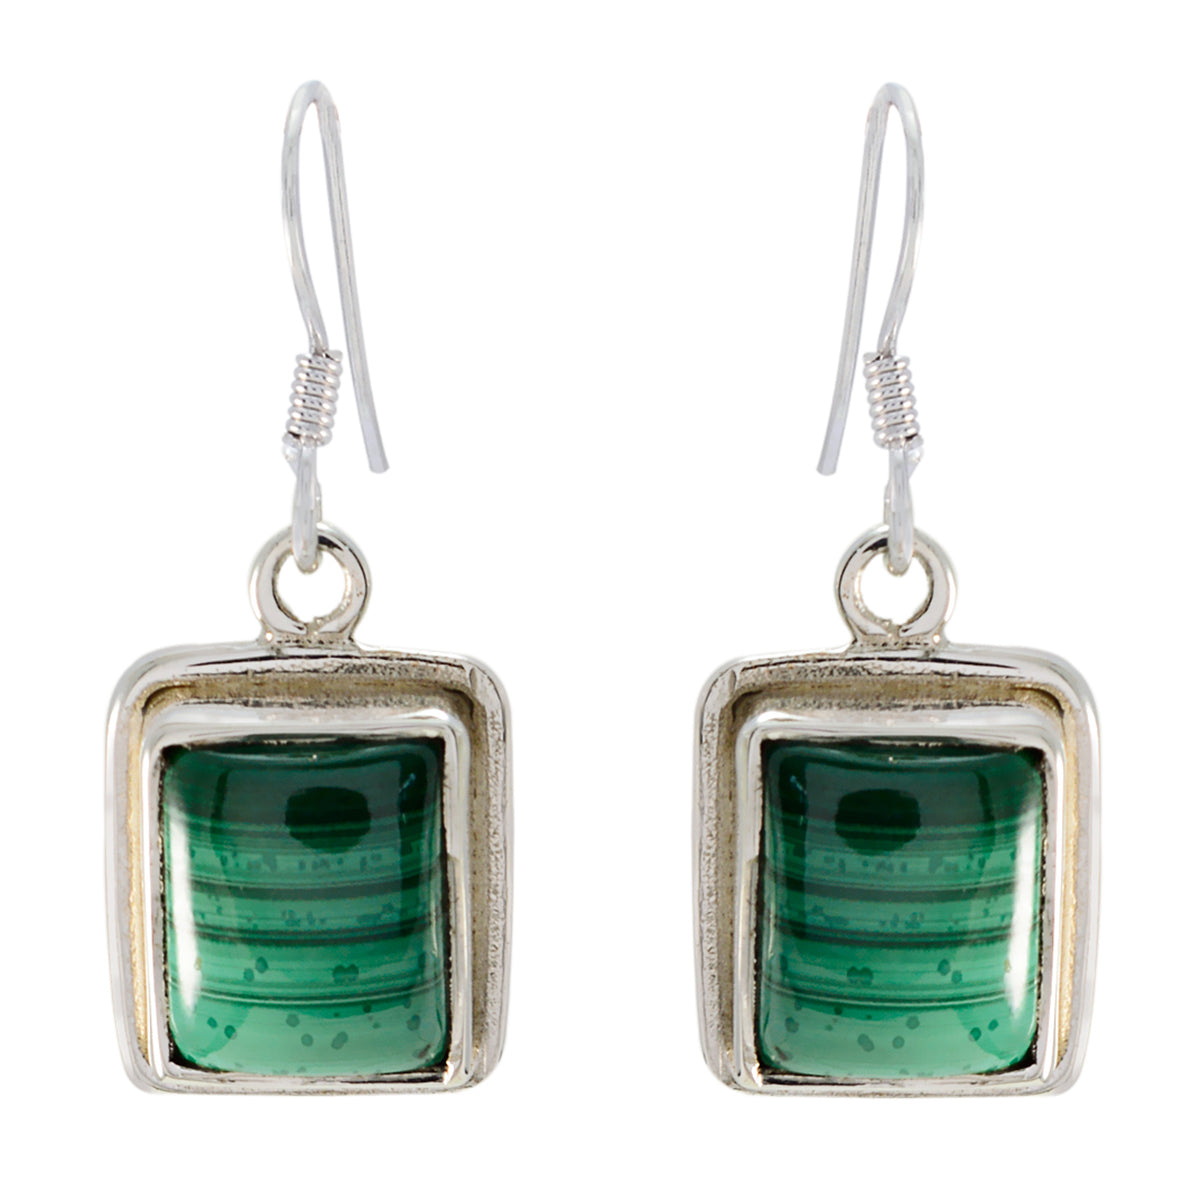 Riyo Genuine Gems Octogon Cabochon Green Malachatie Silver Earrings gift for mothers day